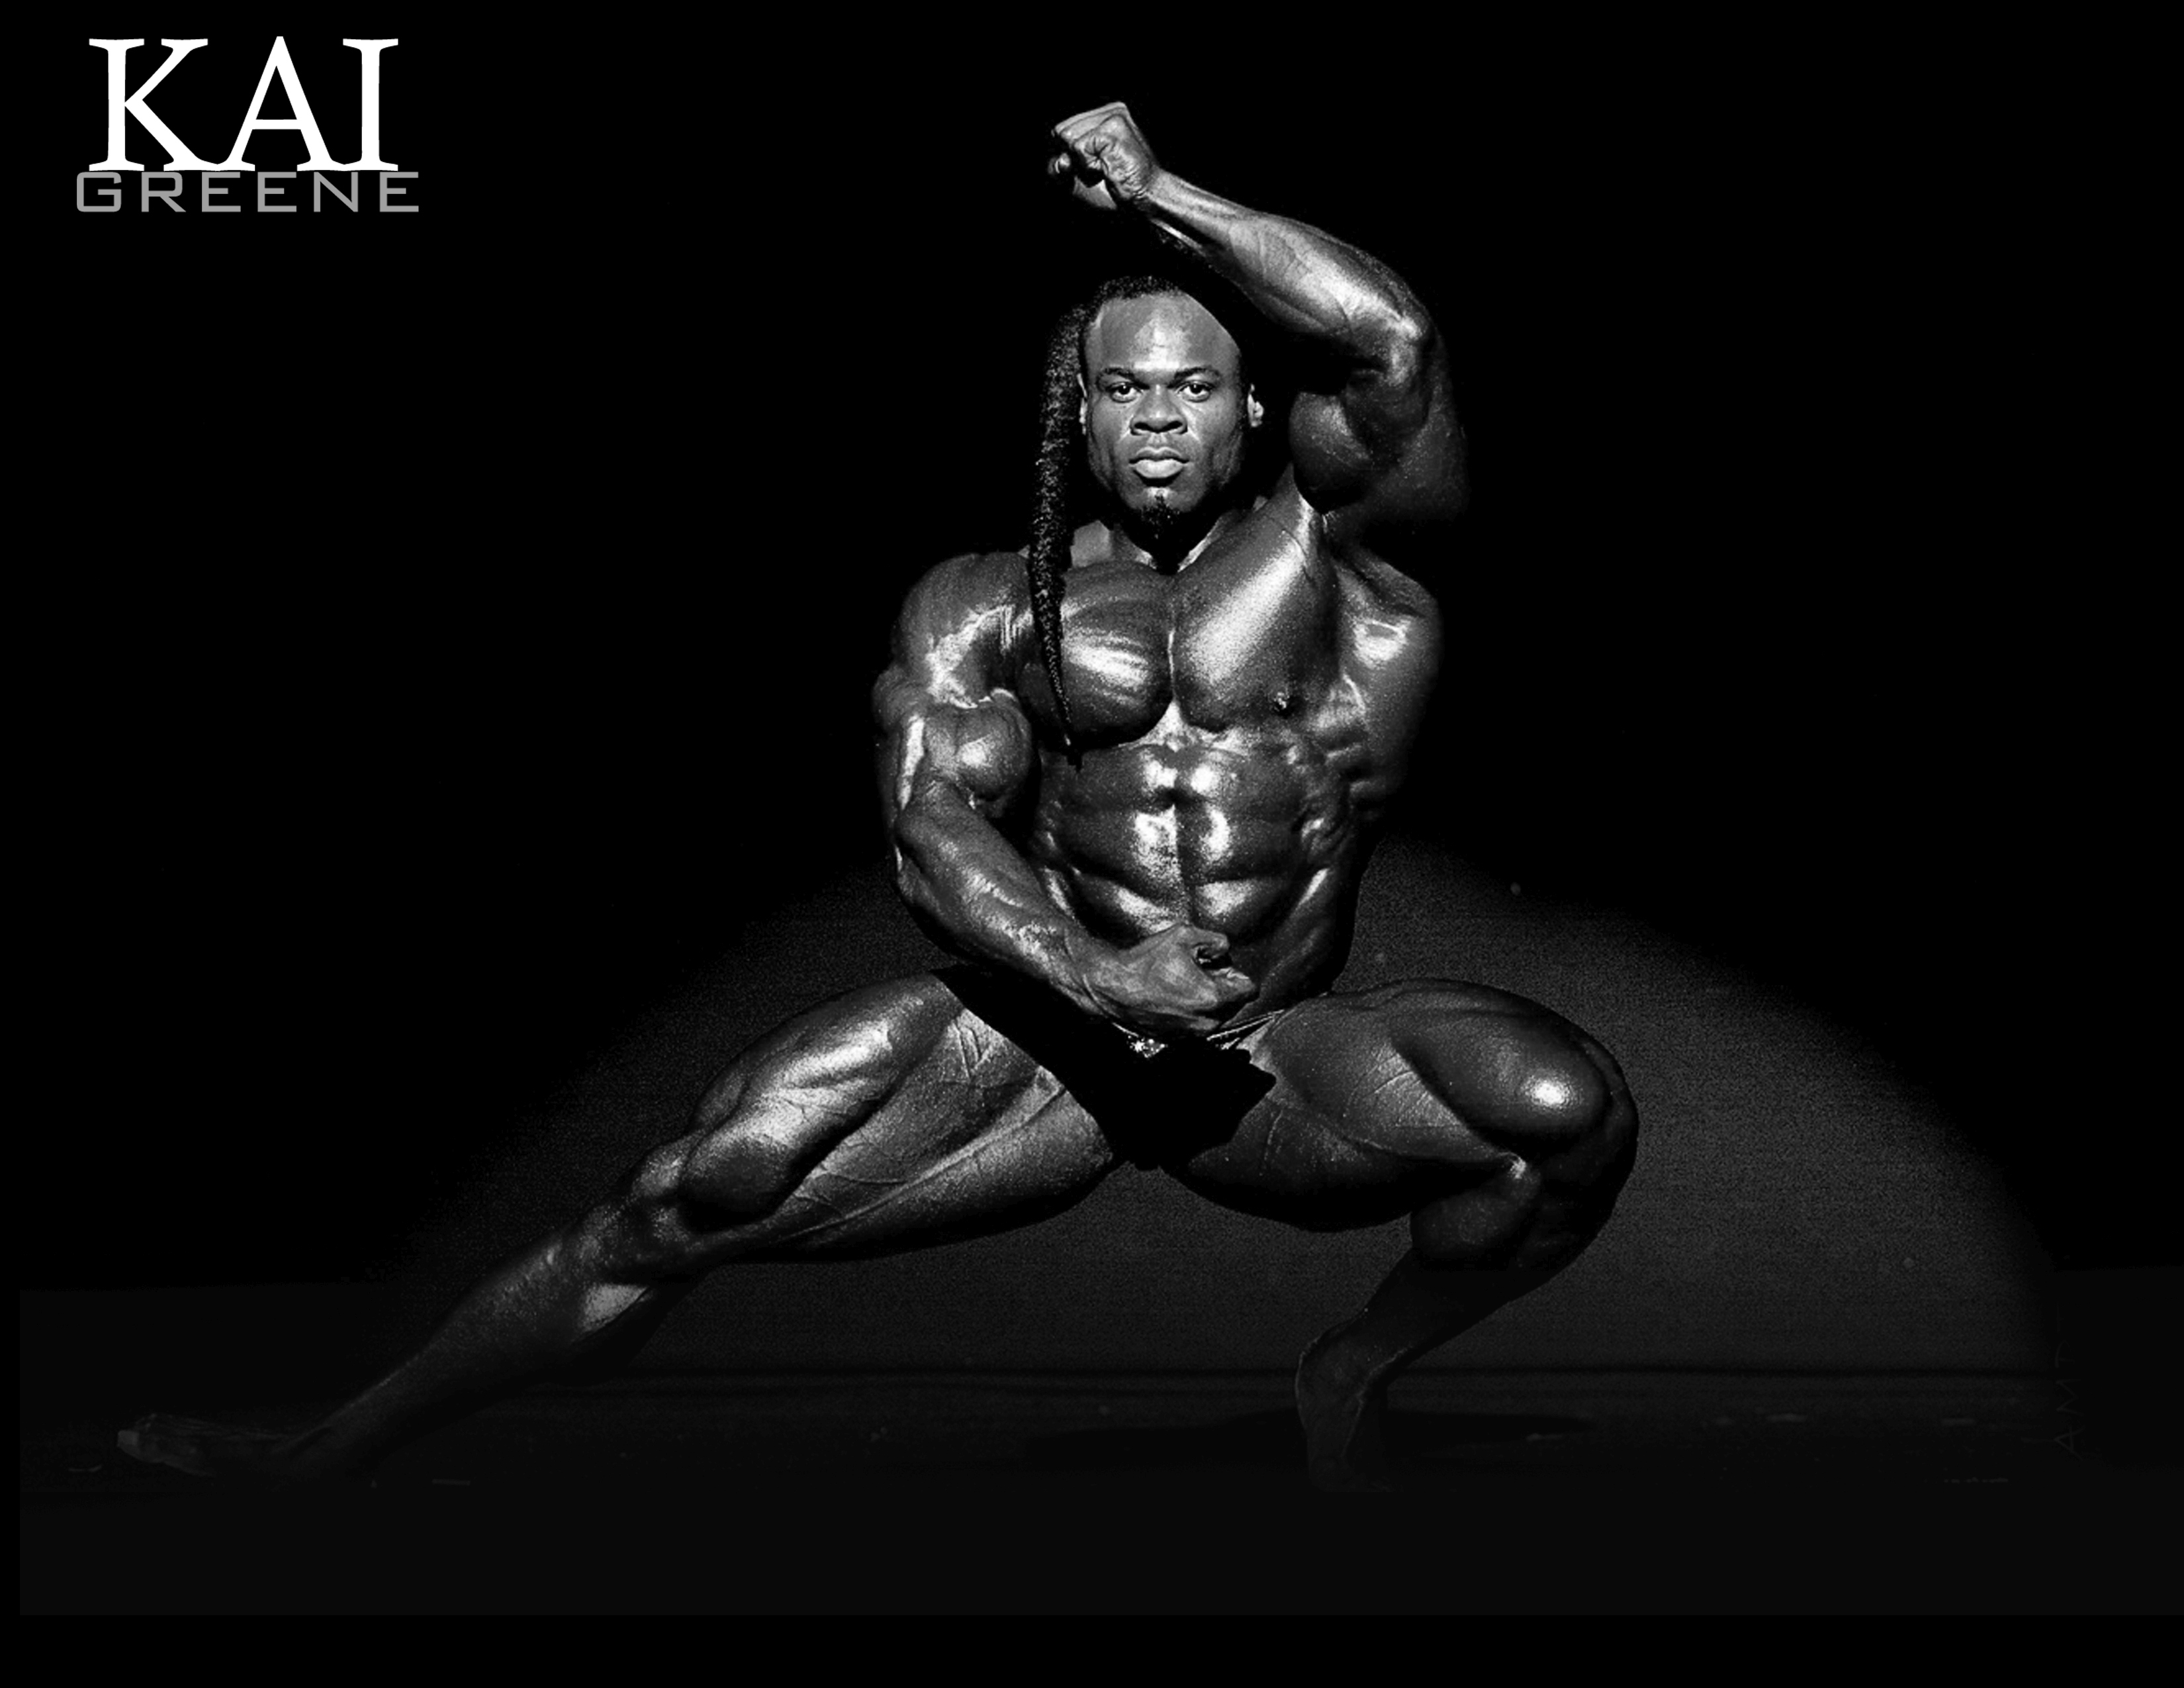 Free Download Best Bodybuilding Wallpaper 14 3300x2550 For Your Images, Photos, Reviews